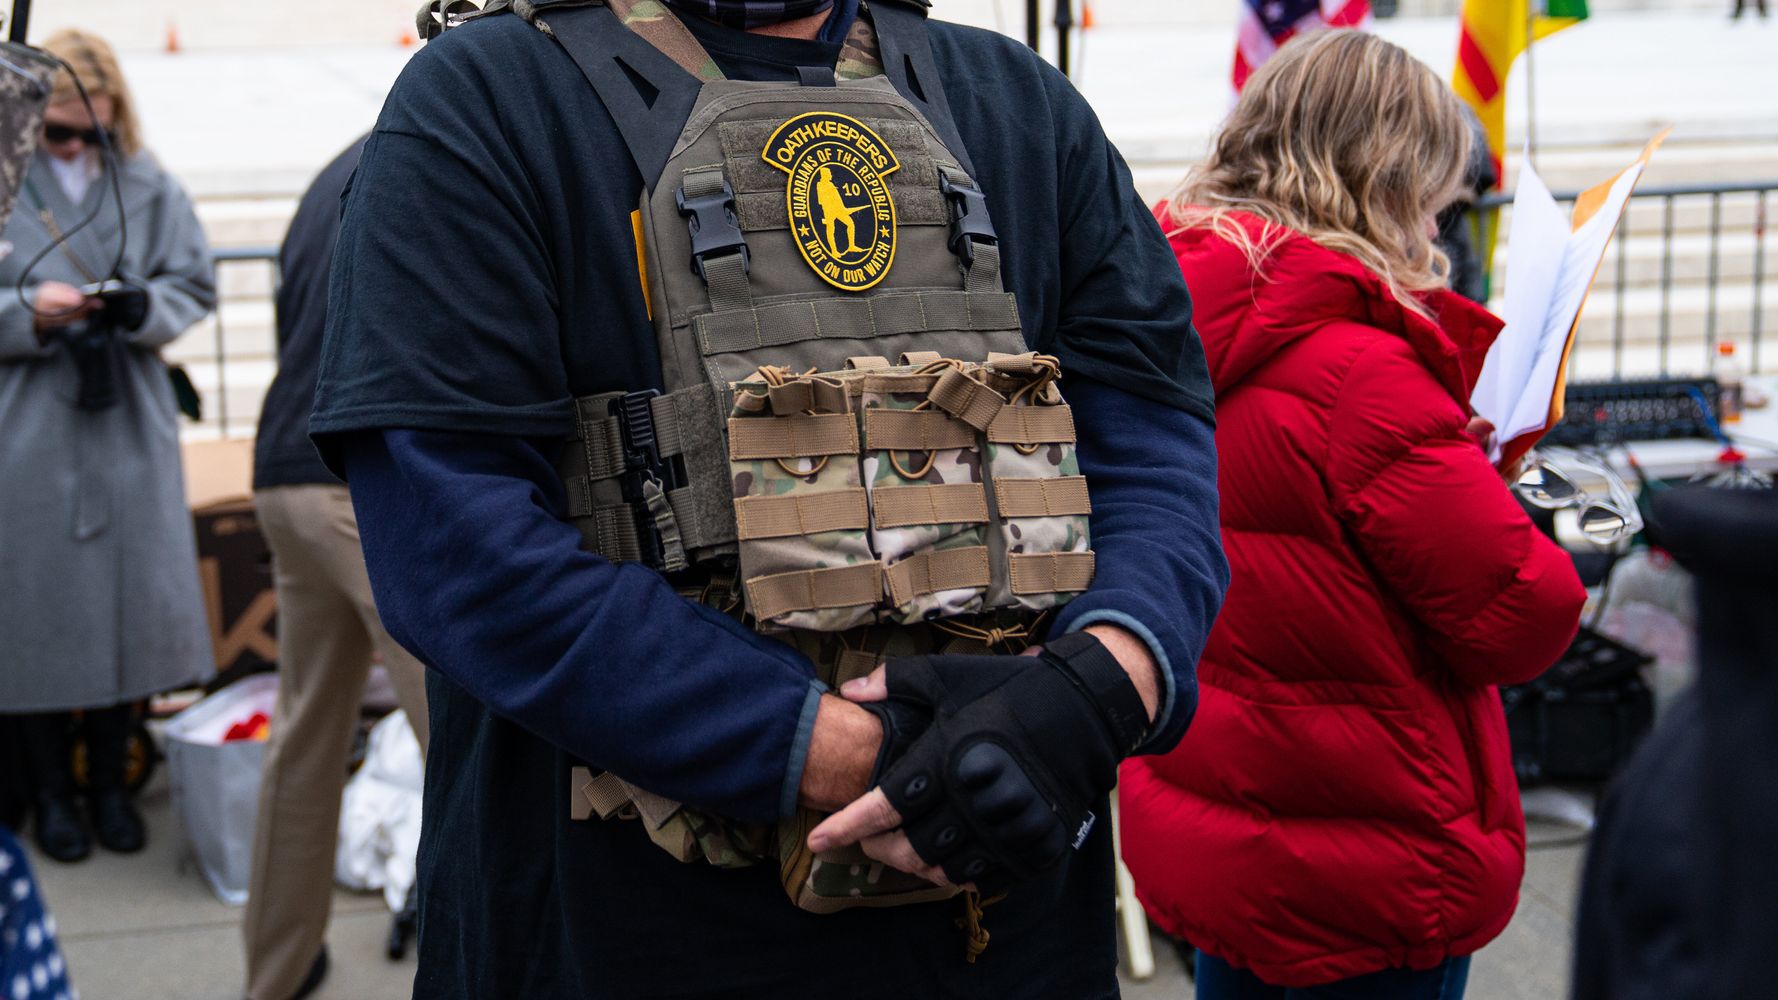 Police, Service Members Bragged About Credentials To Join Oath Keepers: Reports